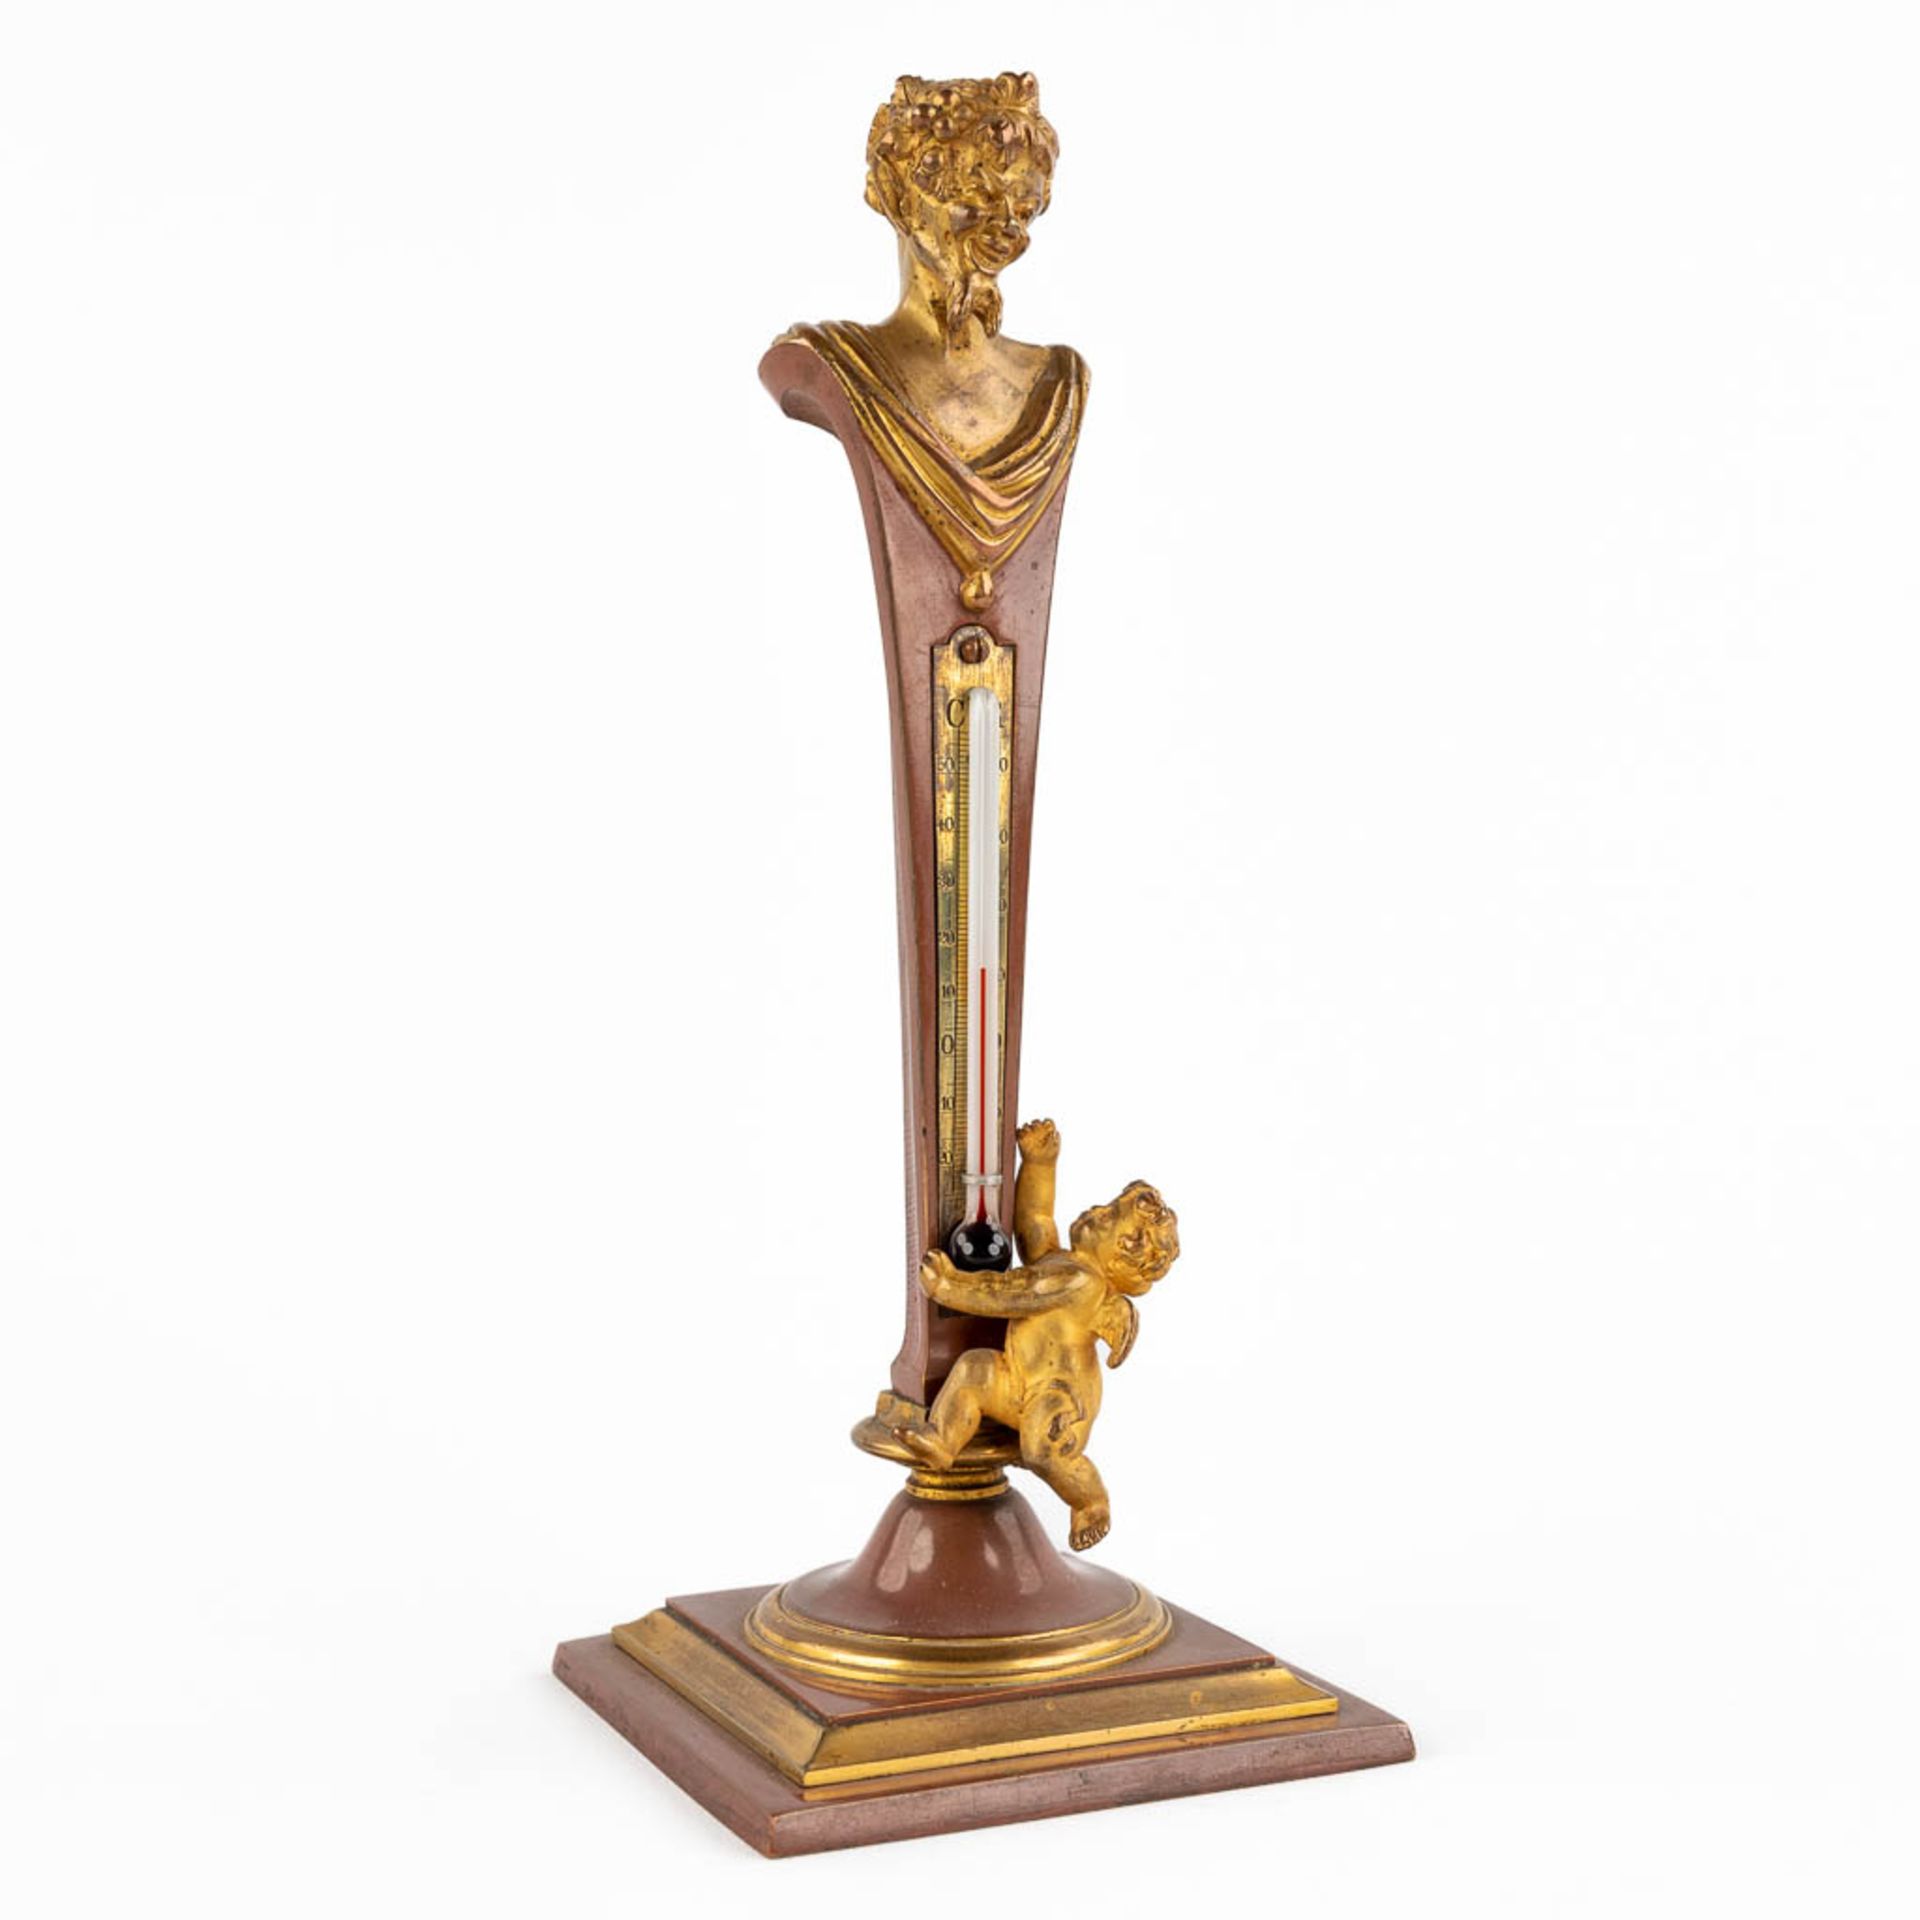 An antique thermometer, patinated bronze, decorated with a Satyr figurine and a putto. 19th C. (D:8 - Image 3 of 10